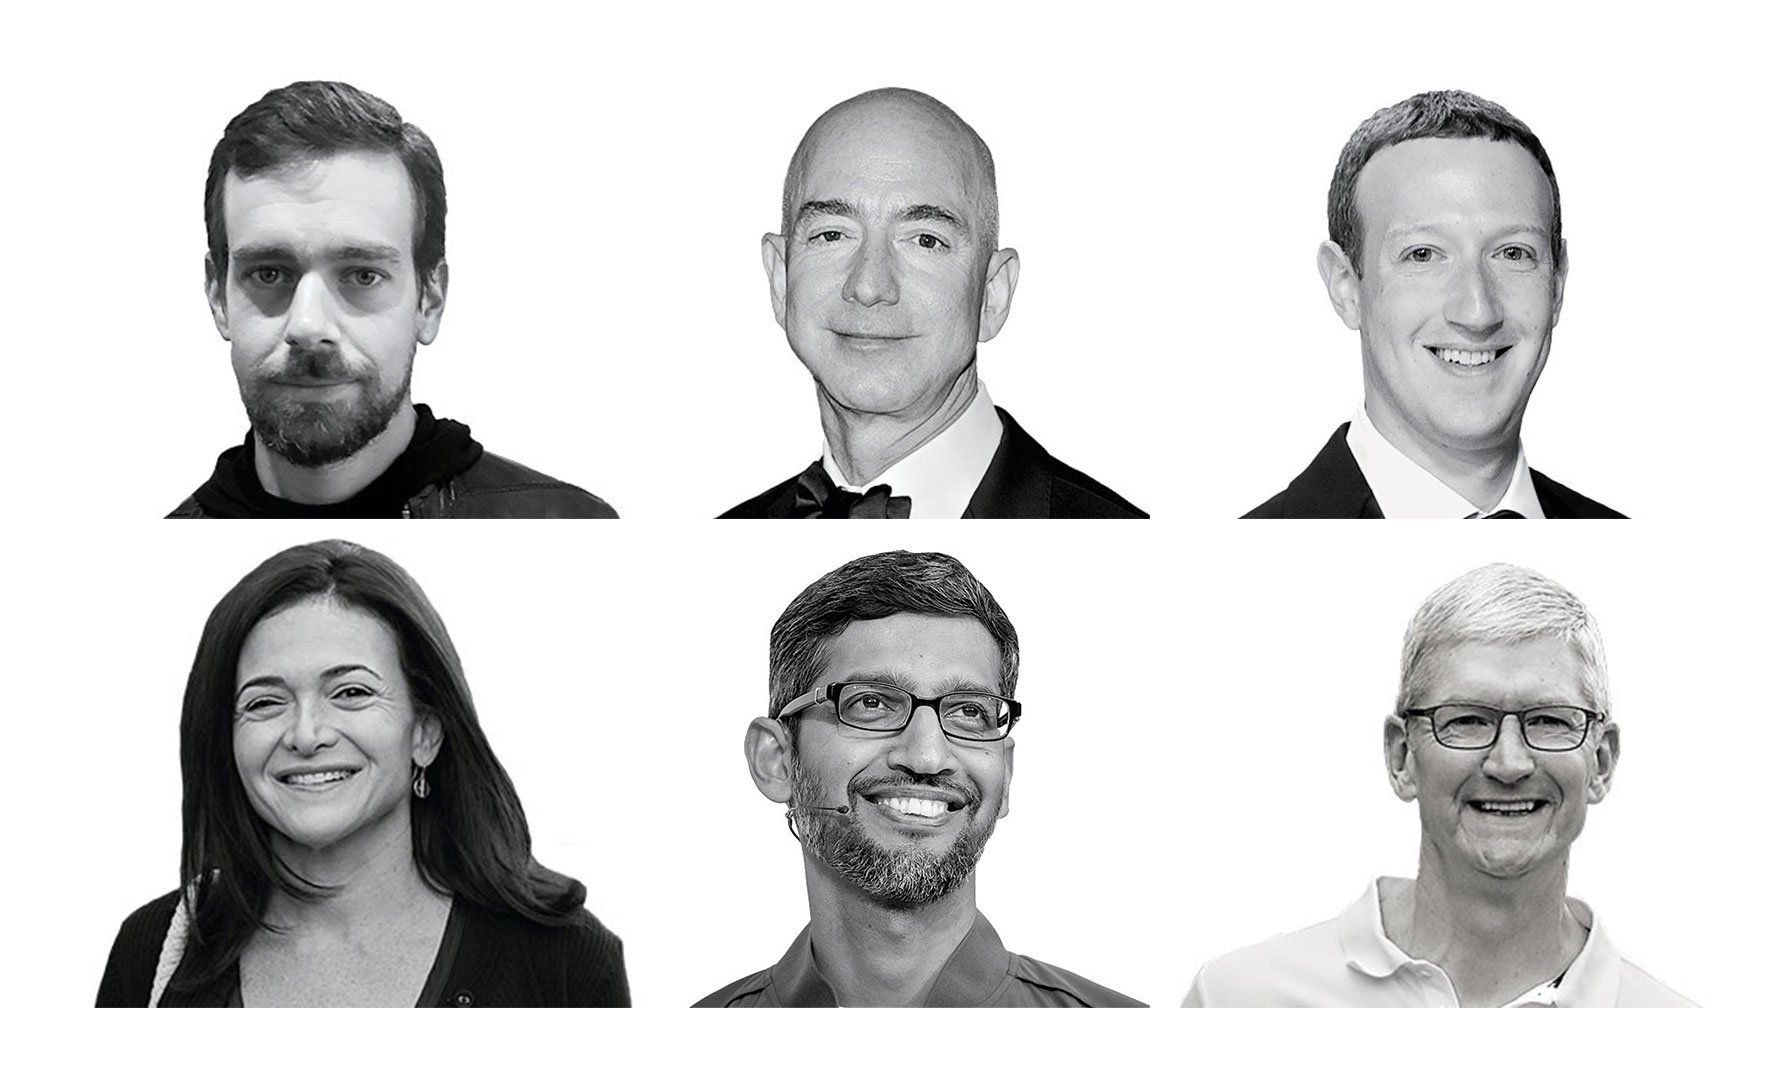 The heads of Big Tech—Barry Lynn's nemesis. Top row, from left to right: Twitter CEO Jack Dorsey (Rory Cellan/Flickr), Amazon CEO Jeff Bezos (Allen Berezovsky/WireImage), Facebook CEO Mark Zuckerberg (Taylor Hill/Getty); Bottom row, from left to right: Facebook COO Sheryl Sandberg (Drew Angerer/Getty), Google CEO Sundar Pichai (David Paul Morris/Bloomberg), Apple CEO Tim Cook (Drew Angerer/Getty).